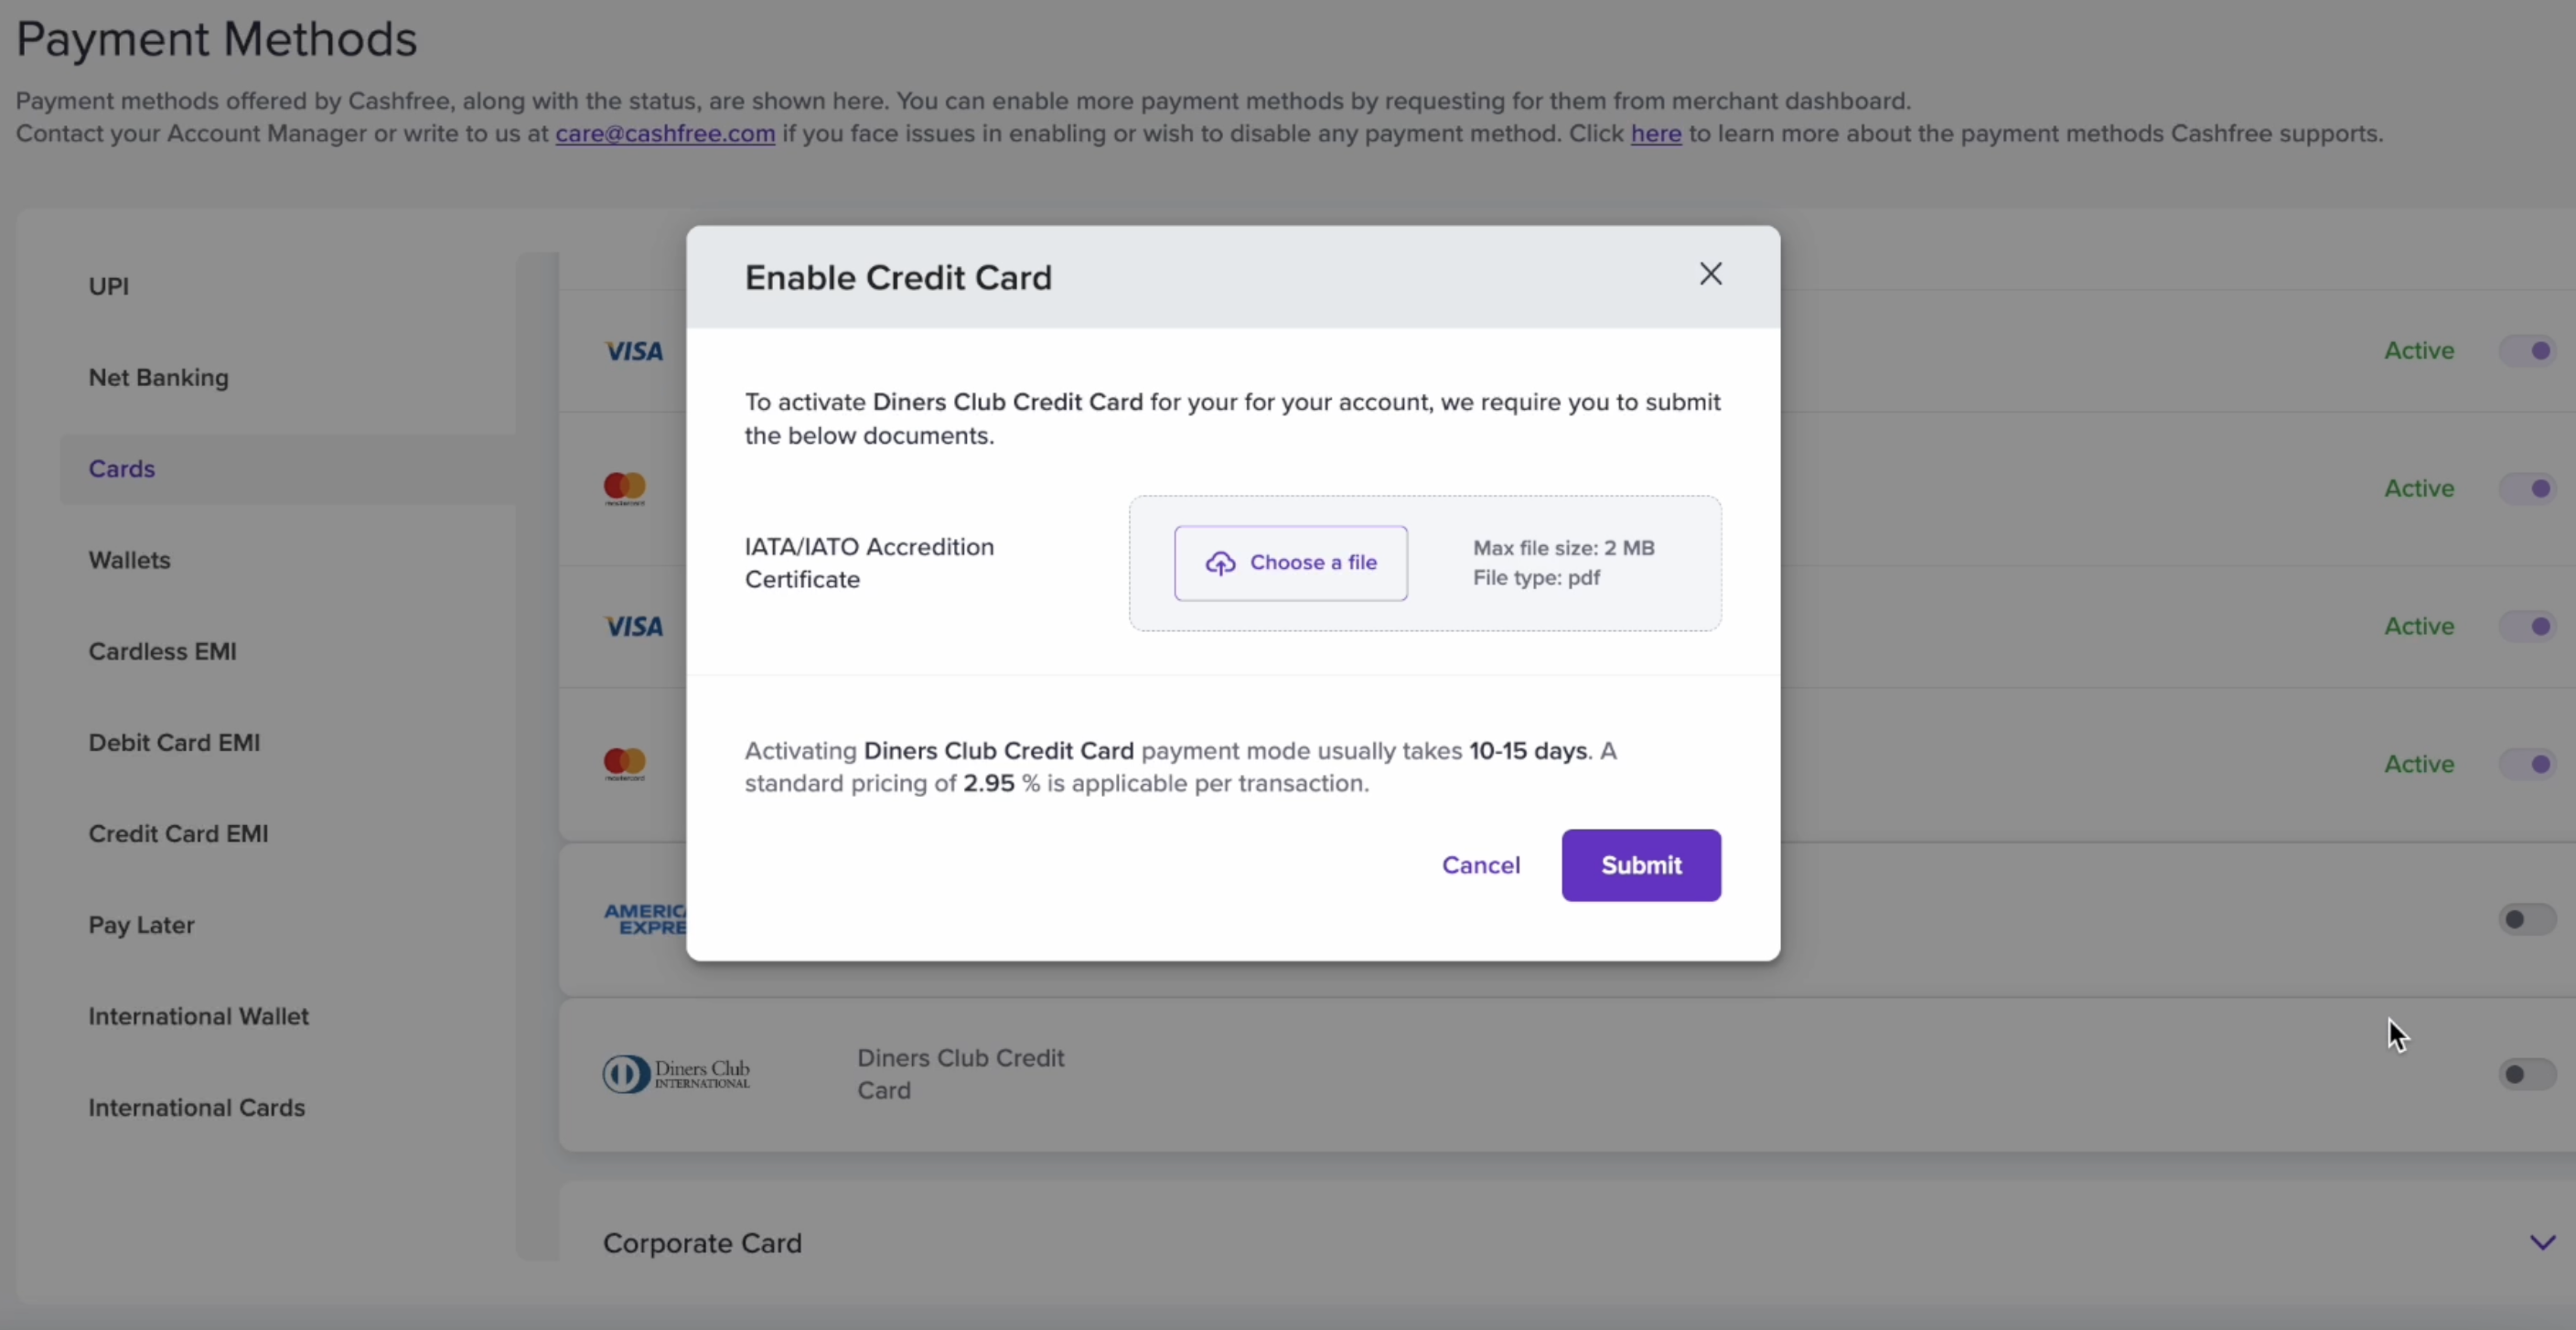 Submit Request to Enable Payment Method